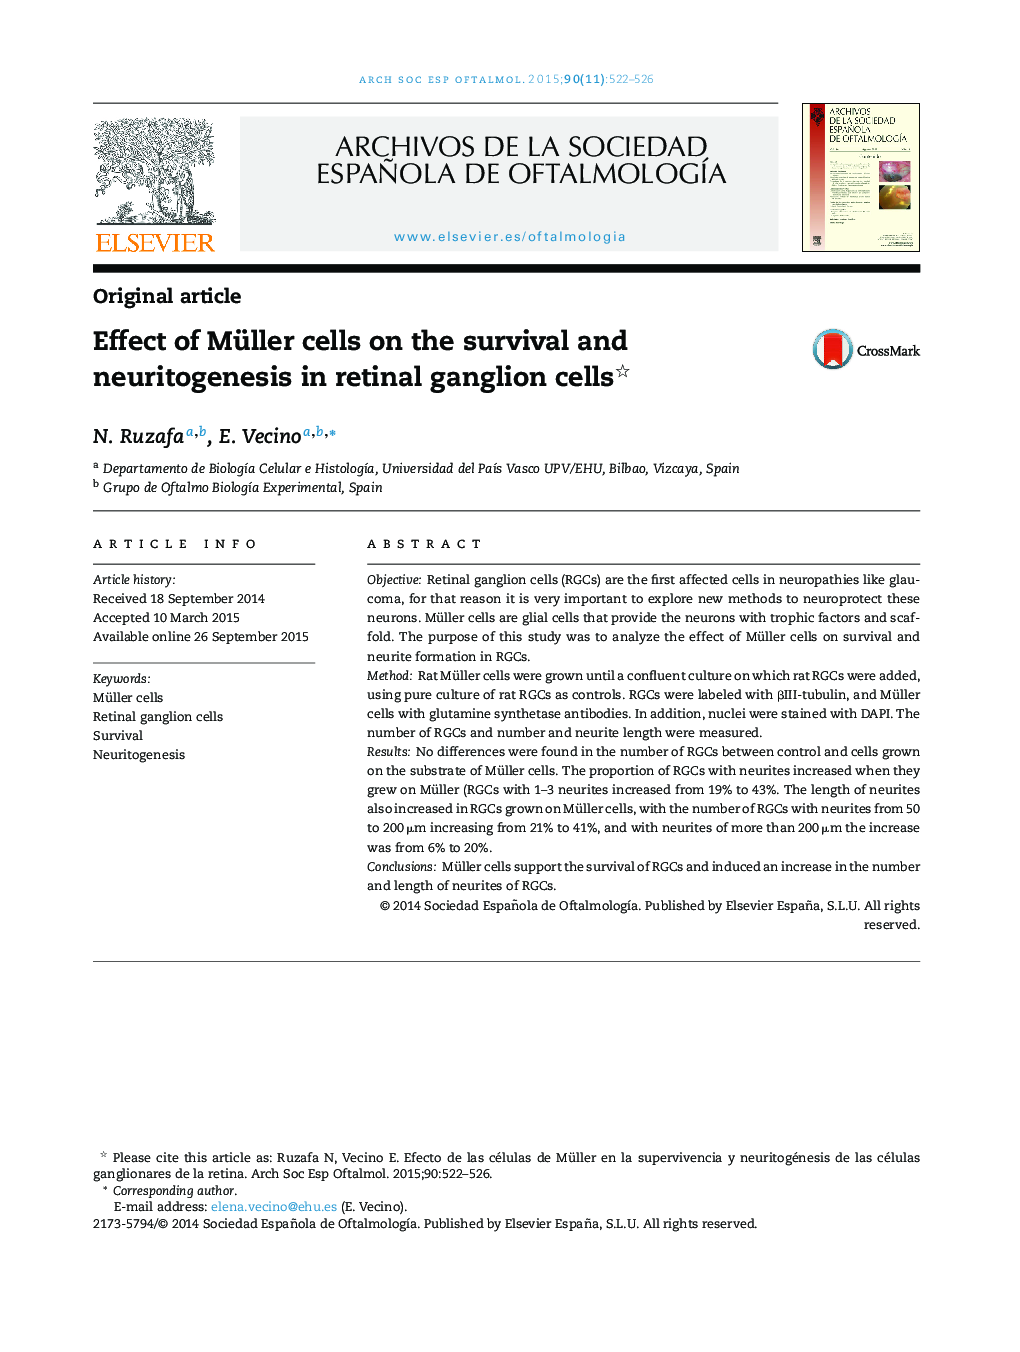 Effect of Müller cells on the survival and neuritogenesis in retinal ganglion cells 